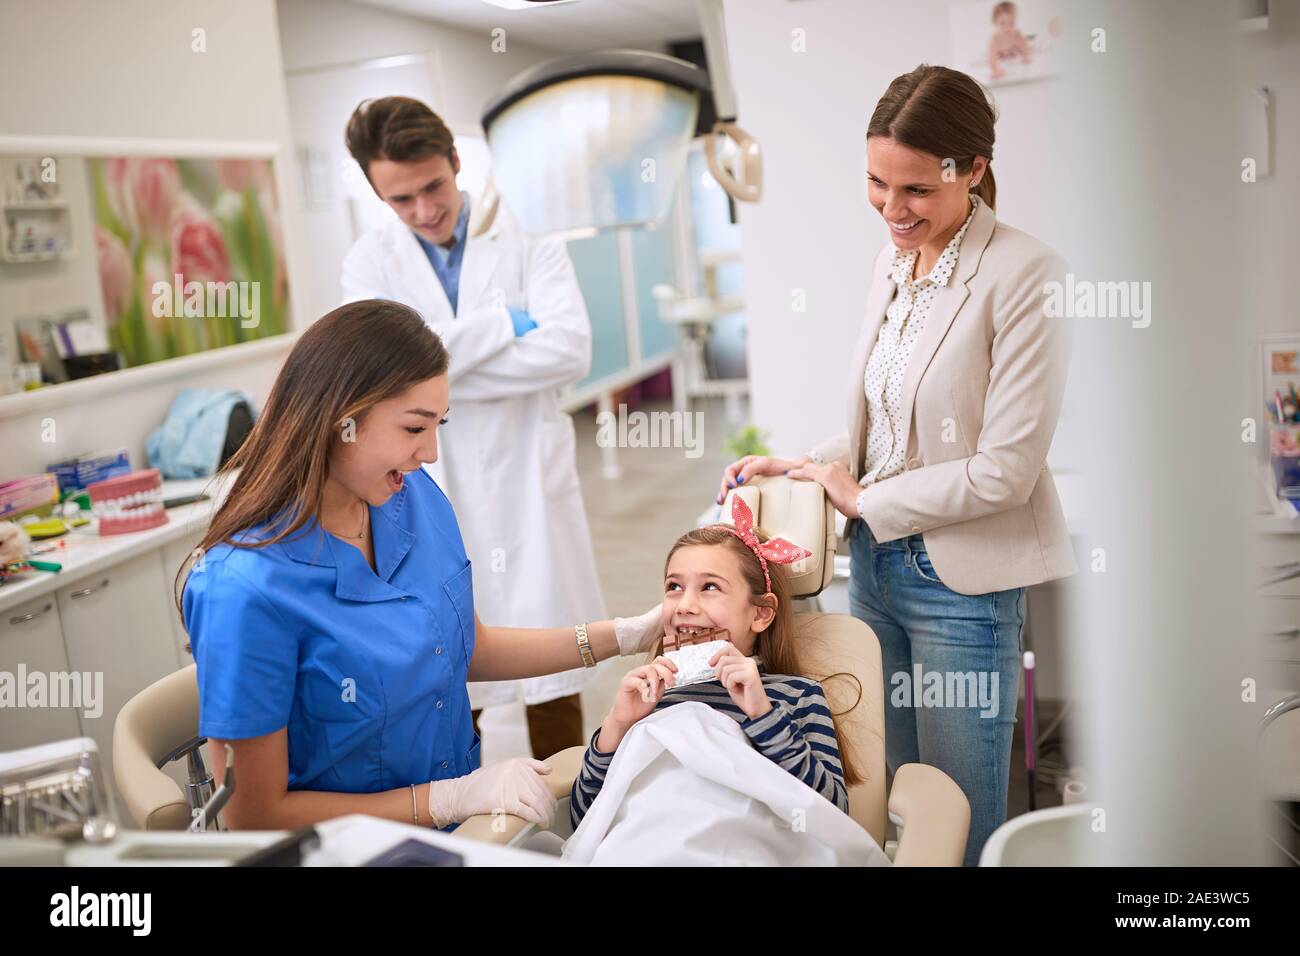 Happy girl in dental chair eating chocolate Stock Photo